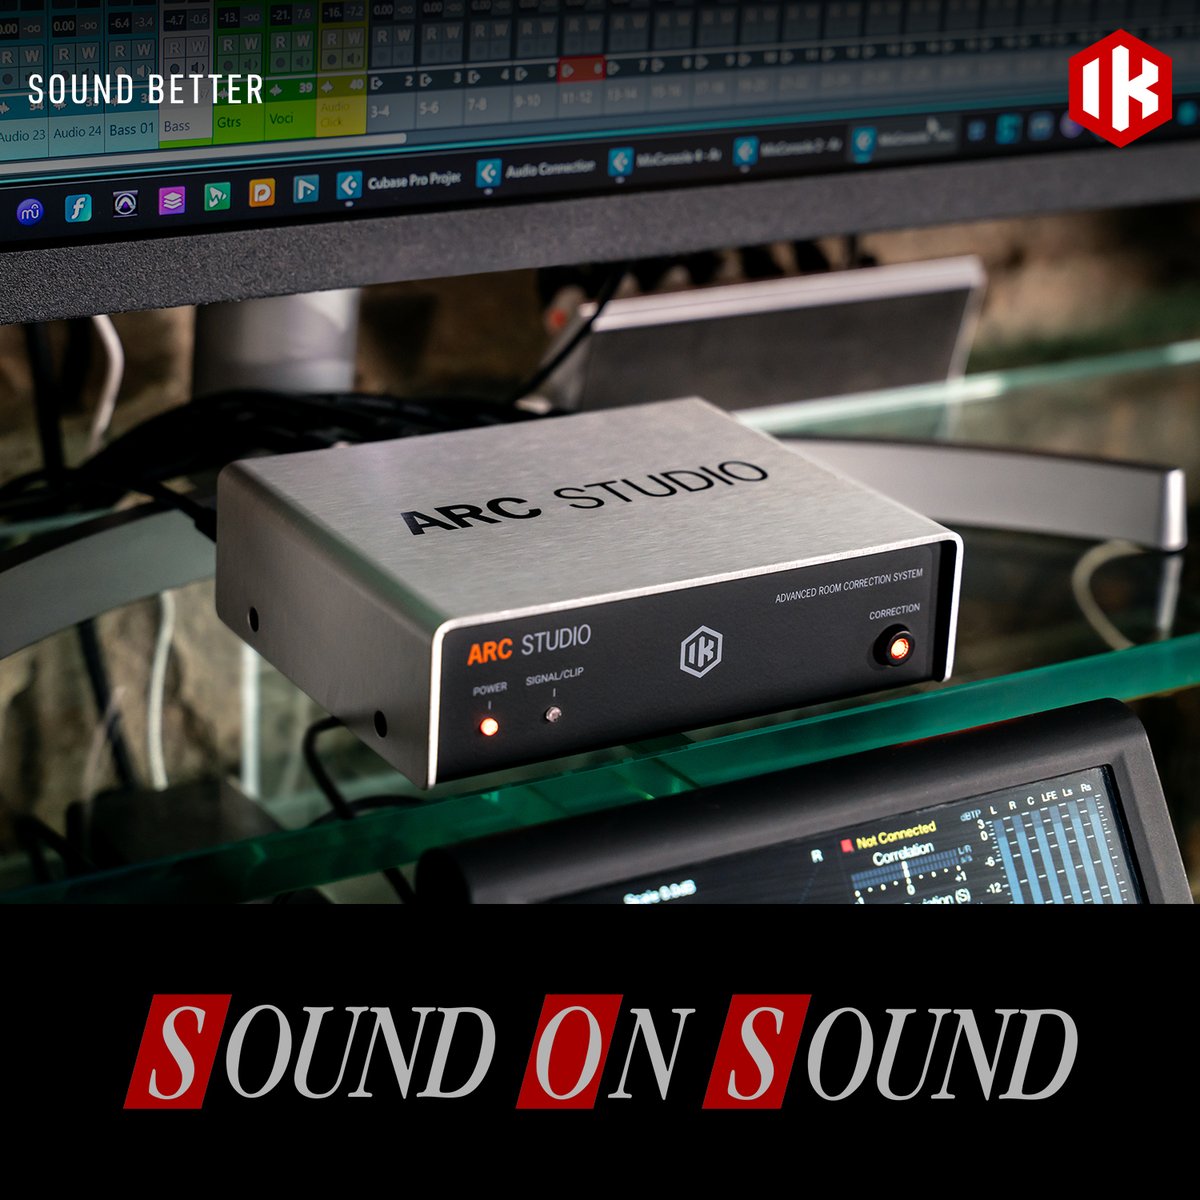 Dive into ARC Studio with @SoundonSoundmag as they cover the setup, the resulting room analysis, and the correction's positive impact on the listening experience. ➡️ bit.ly/sosarcstudio